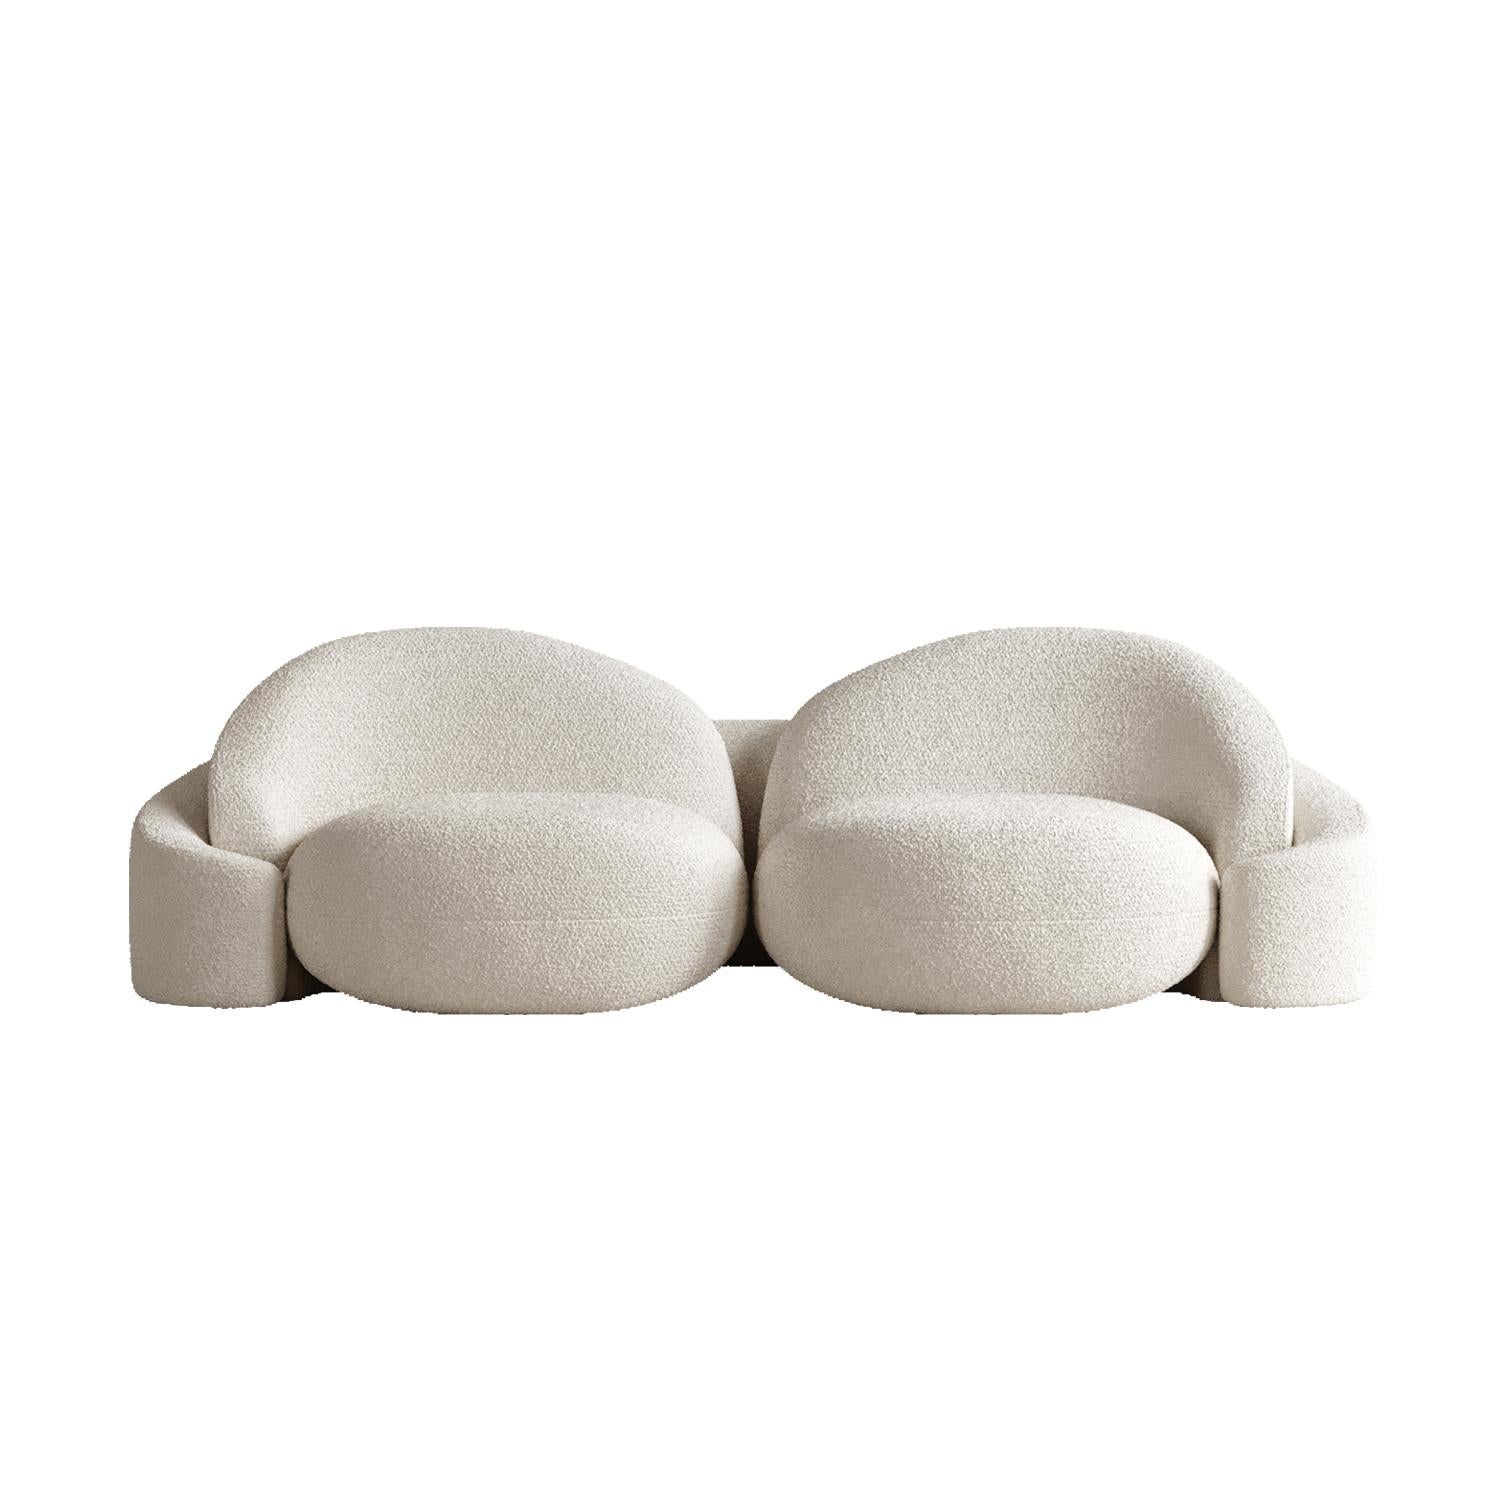 White Lovers Sofa by Plyus Design
Dimensions: D 110 x W 240 x H 73 cm
Materials:  Wood, HR foam, polyester wadding, fabric upholstery.

“Lovers” sofa.
Once upon a time there were two lonely chairs named 